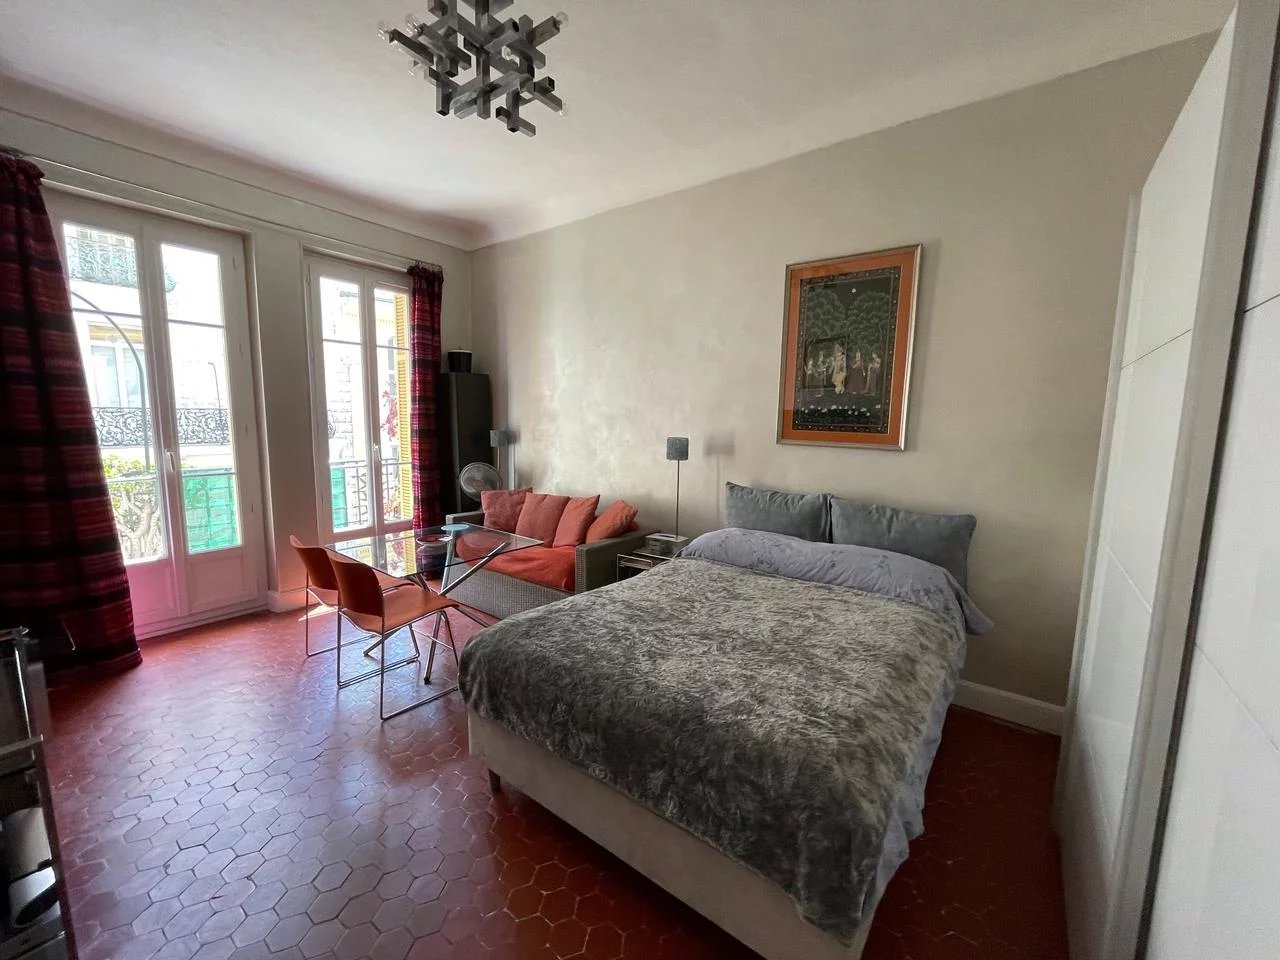 Appartement  4 Rooms 88.06m2  for sale   467 250 €